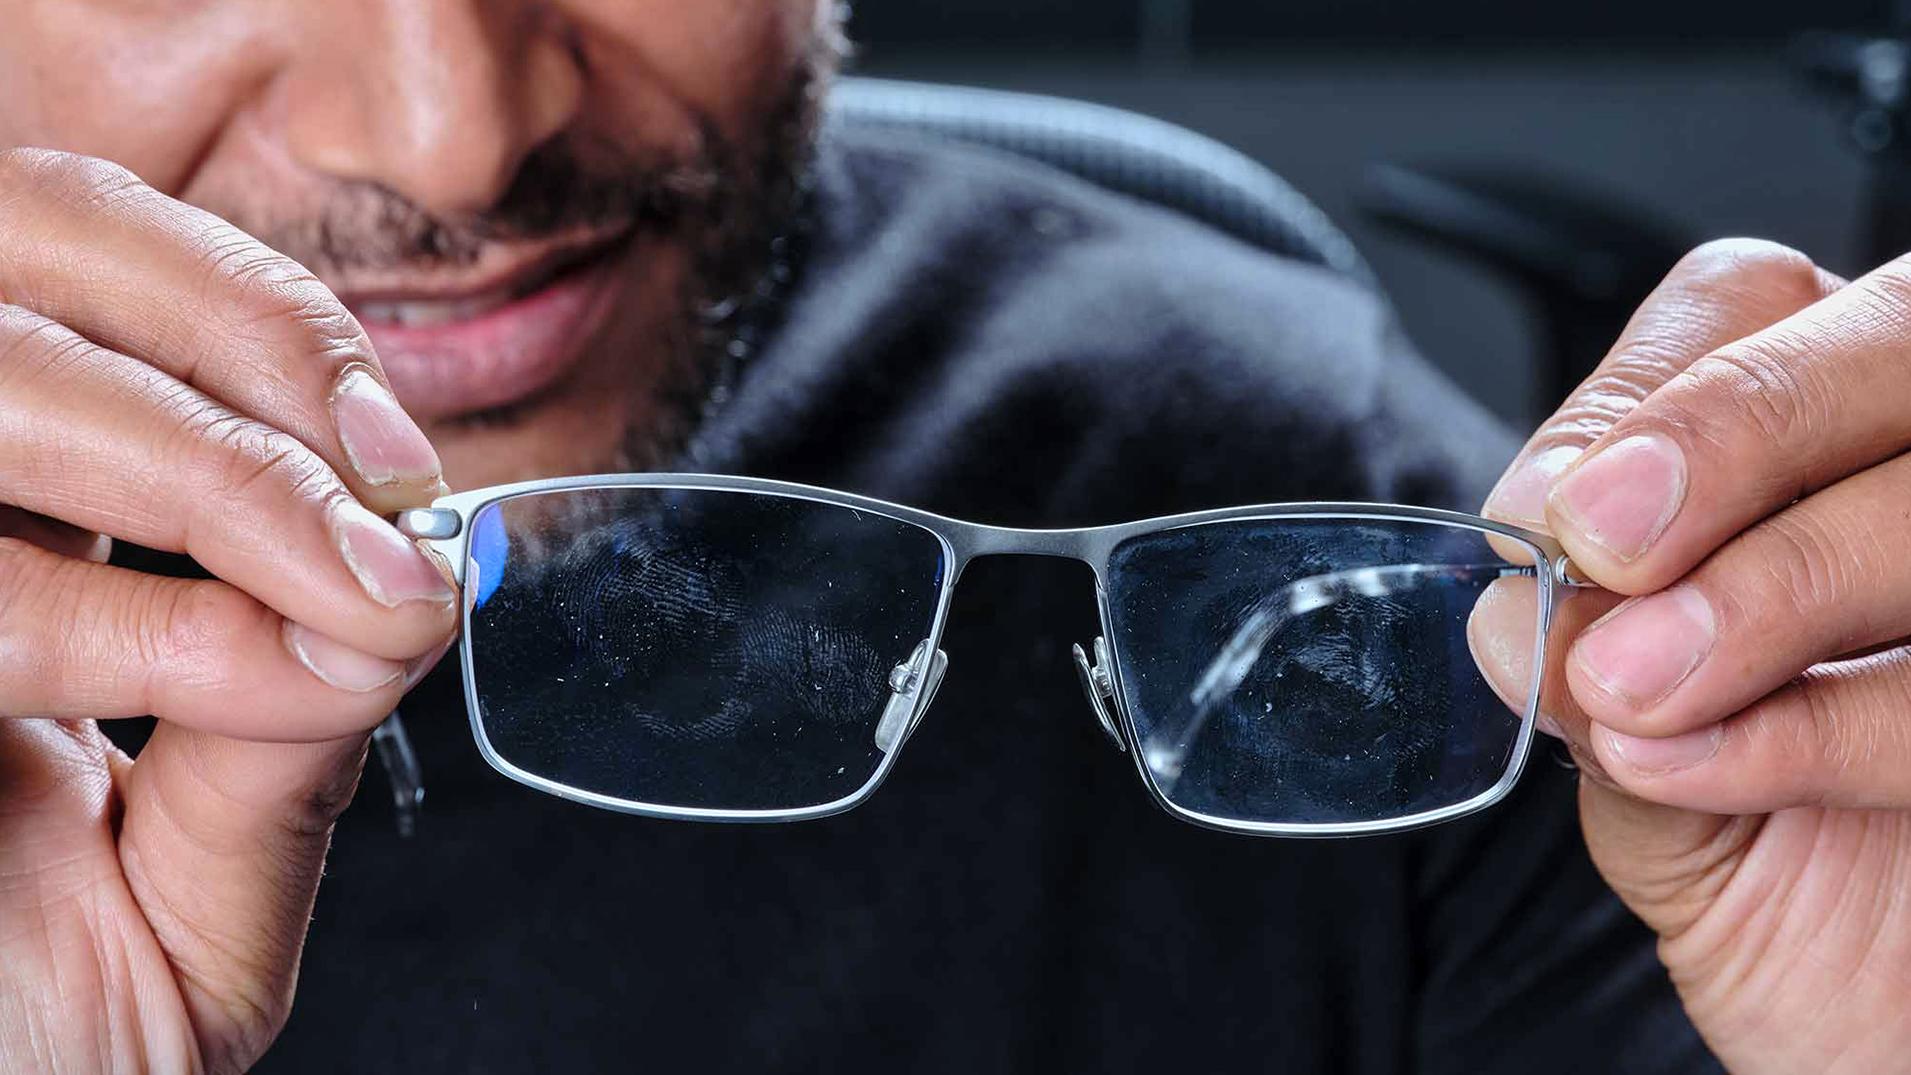 3. Scratches can’t be wiped away, no matter if you have plastic or glass lenses